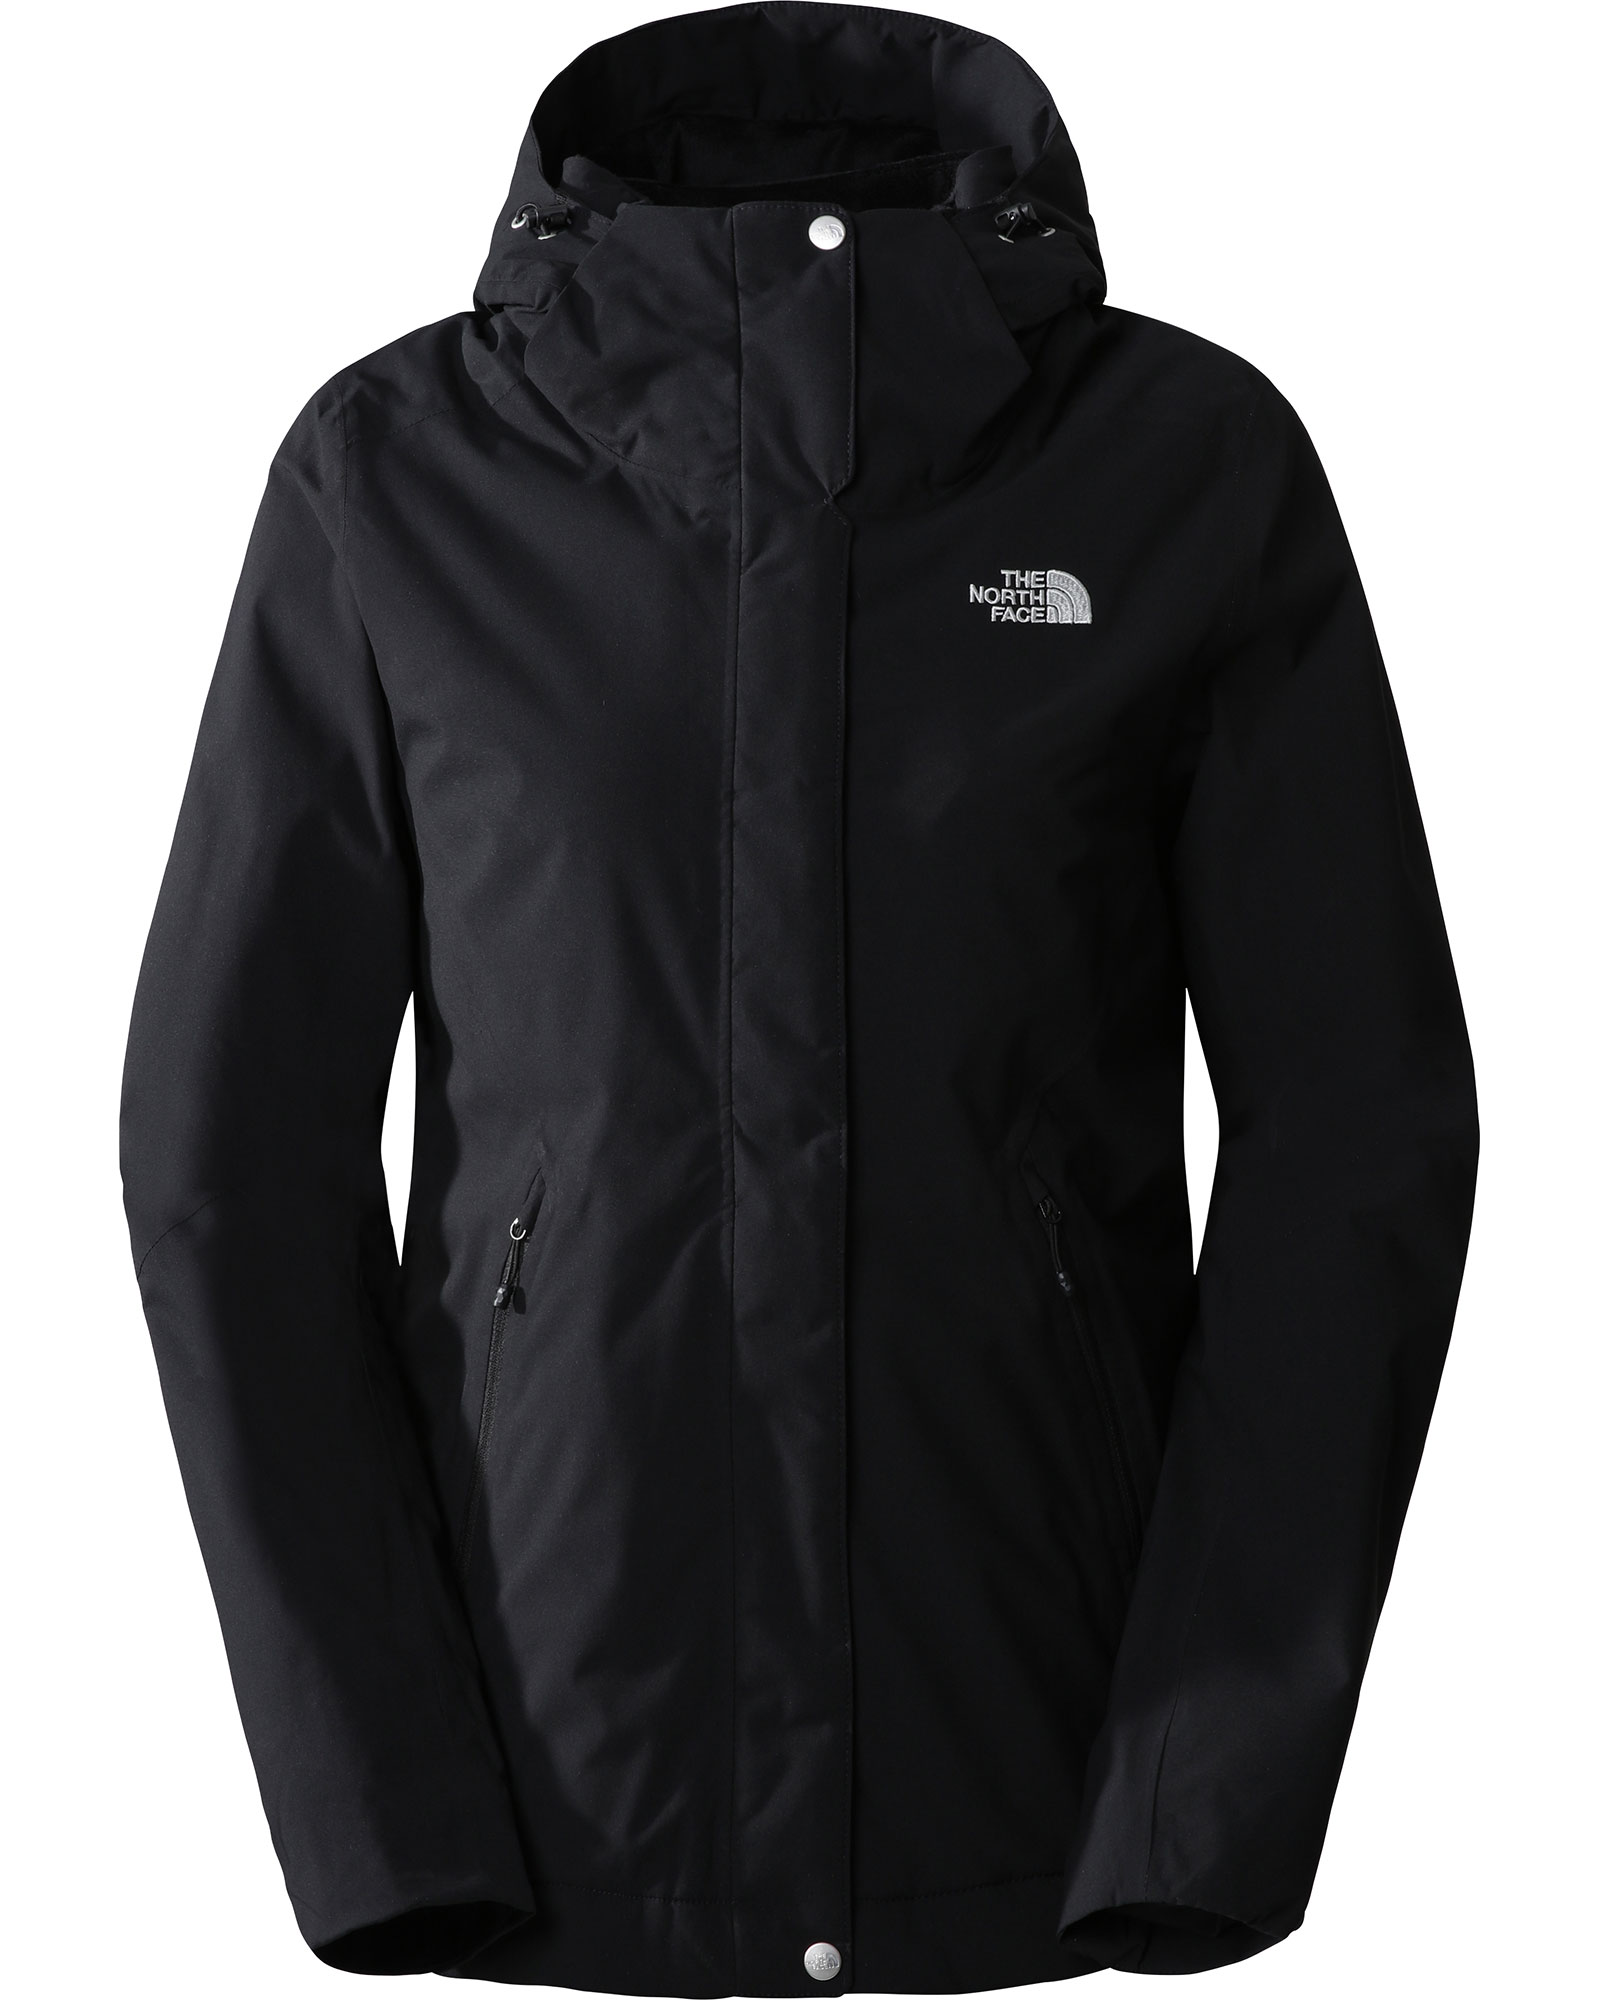 The North Face Inlux Insulated DryVent Women’s Insulated Jacket - TNF Black XL